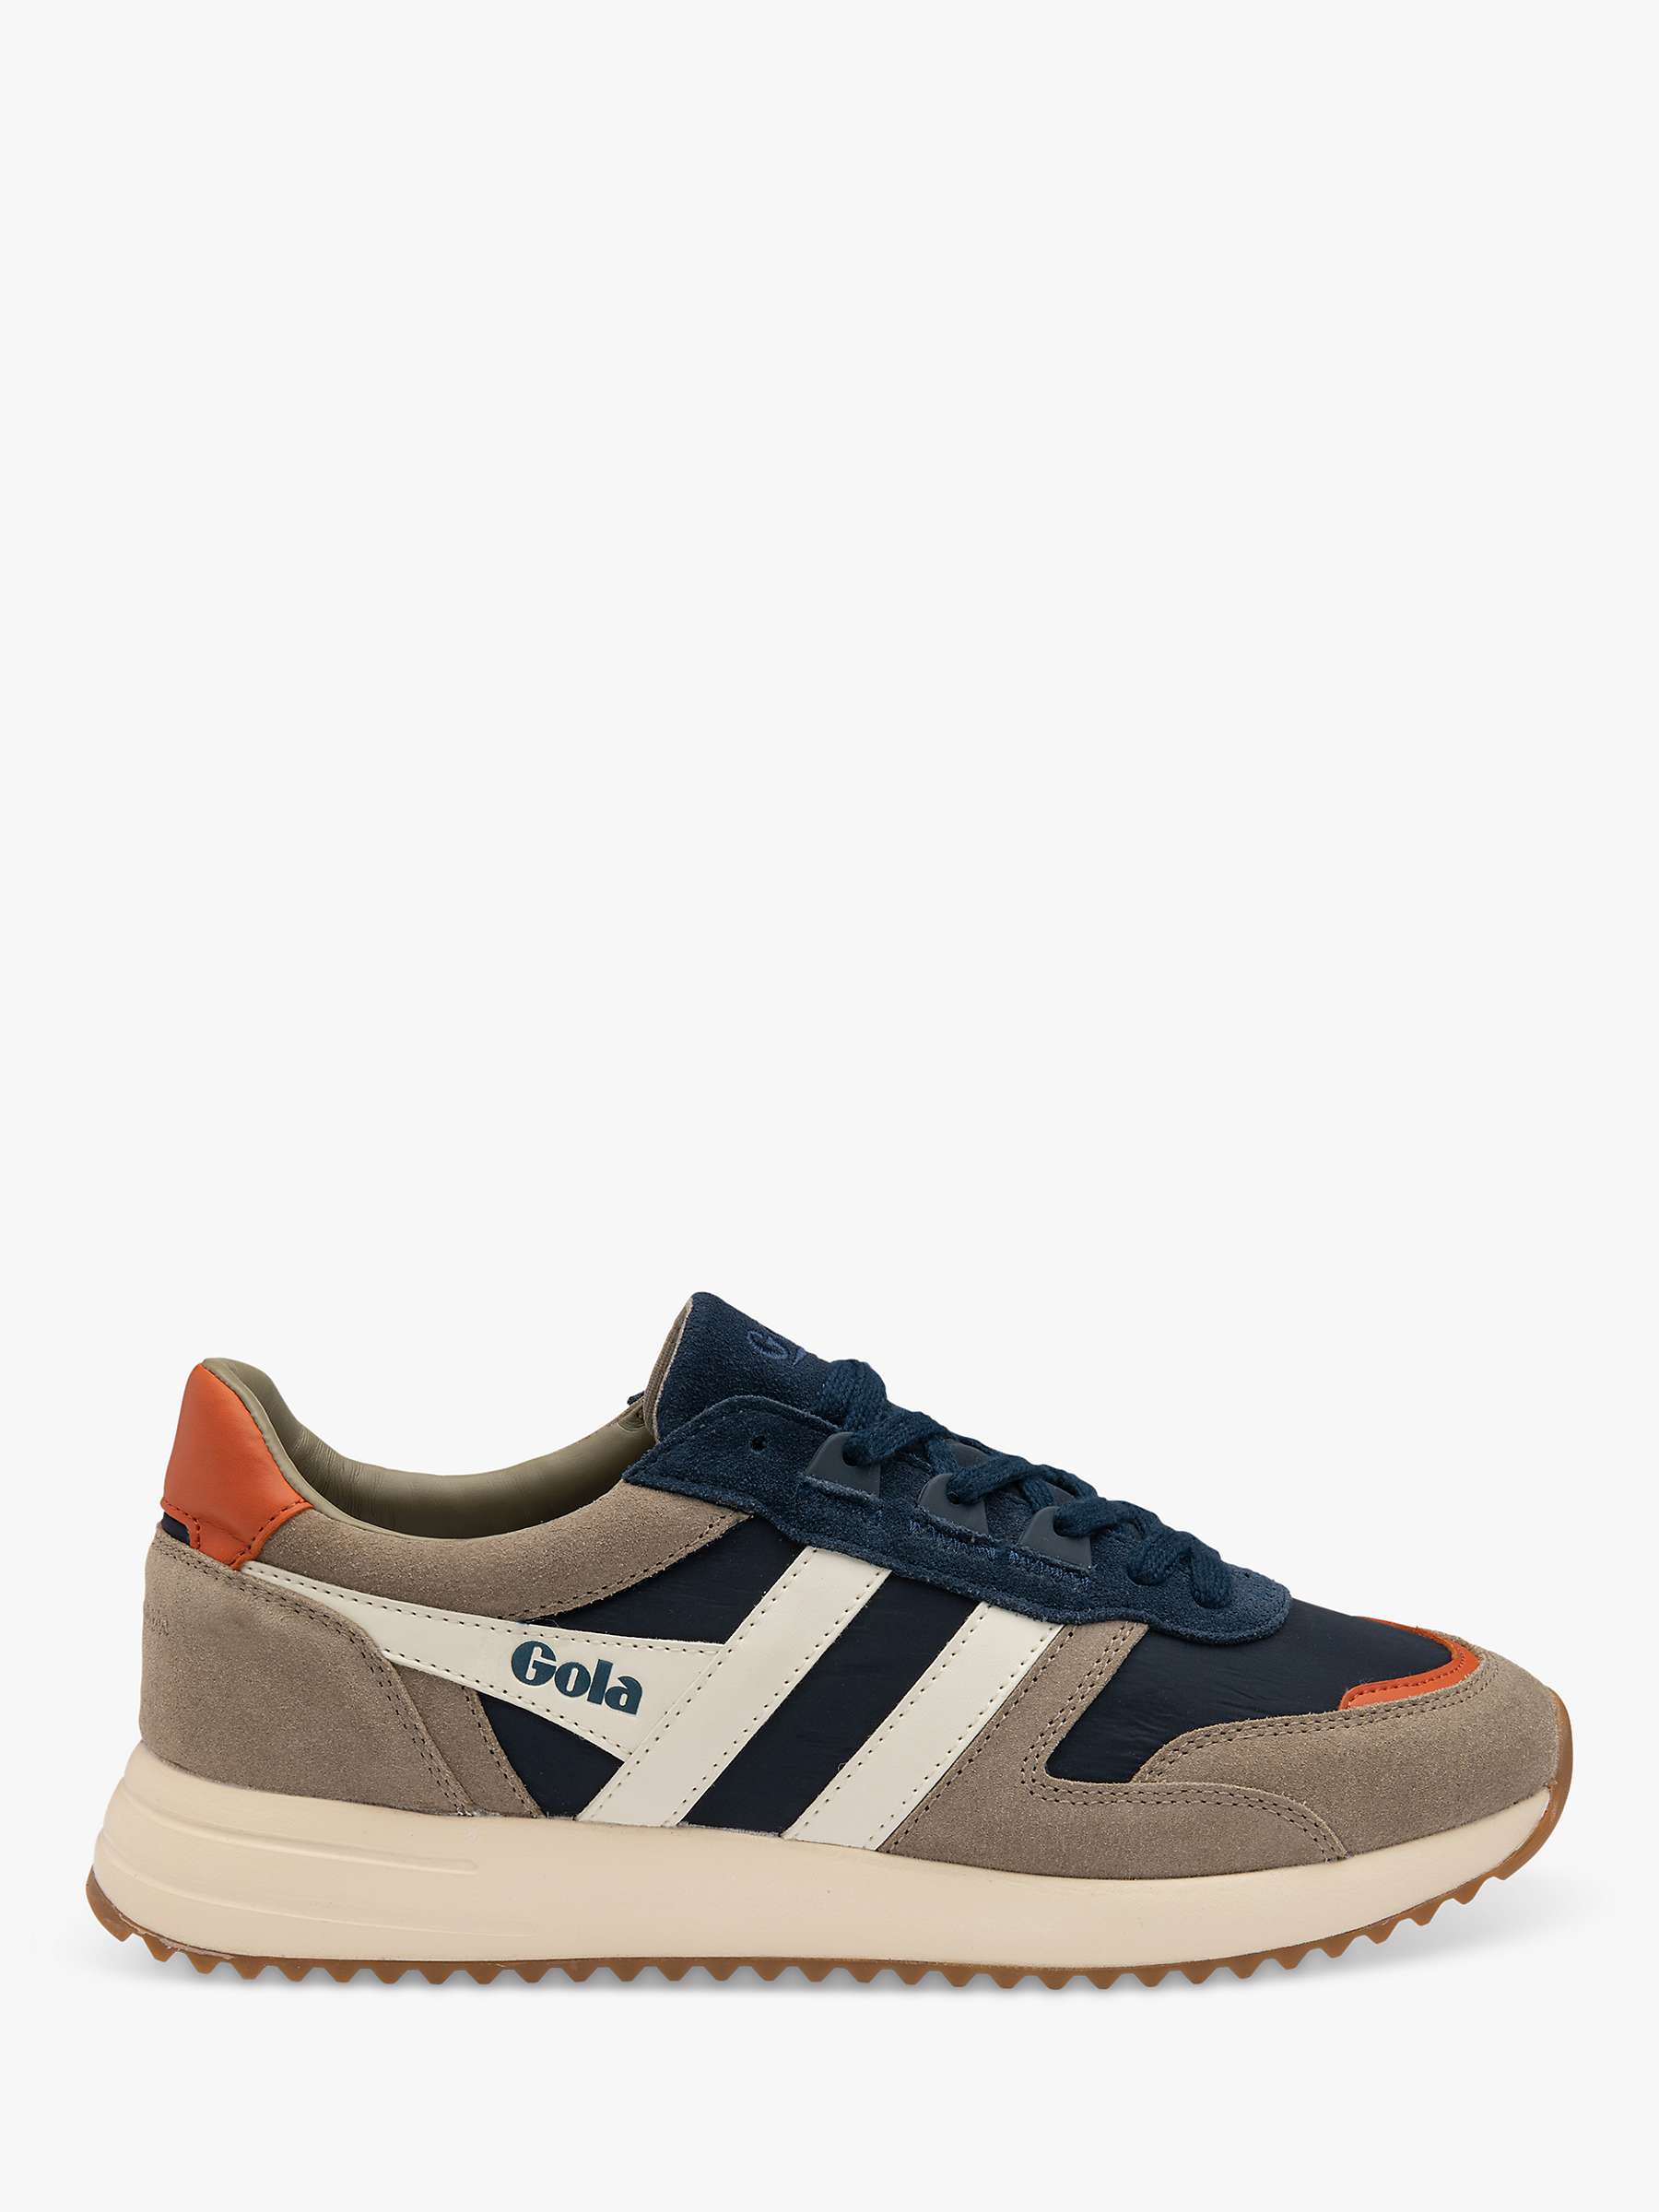 Buy Gola Classics Chicago Nylon Lace-Up Trainers Online at johnlewis.com